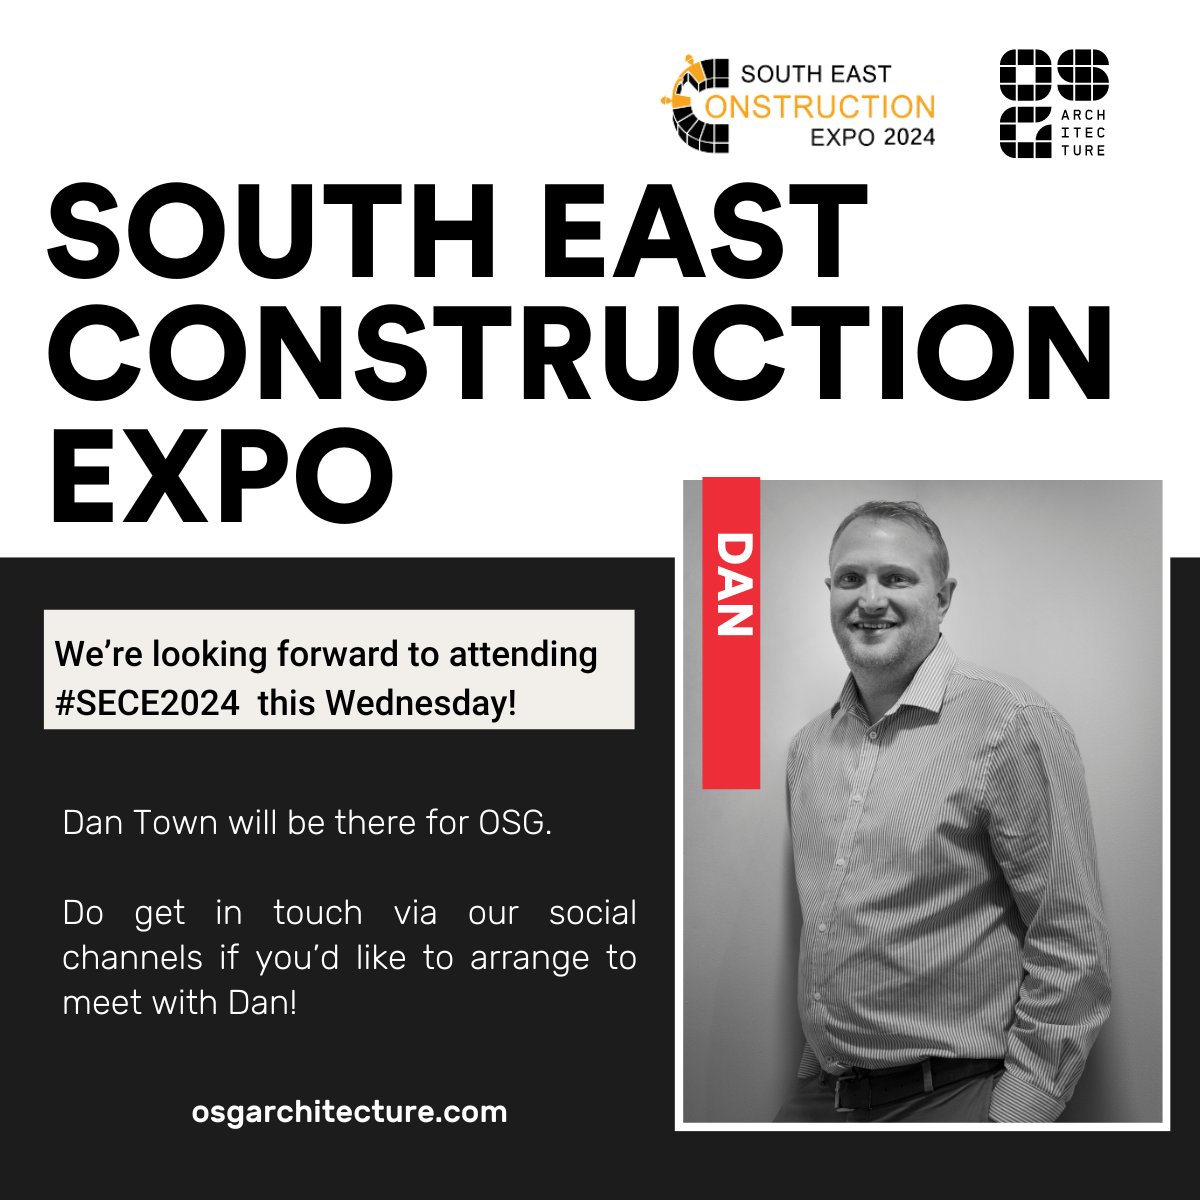 SOUTH EAST CONSTRUCTION EXPO 2024 
Wednesday 1st May - Sandown Park Racecourse, Surrey
Will you be attending? 
#SECE2024 #constructionexpo #networking